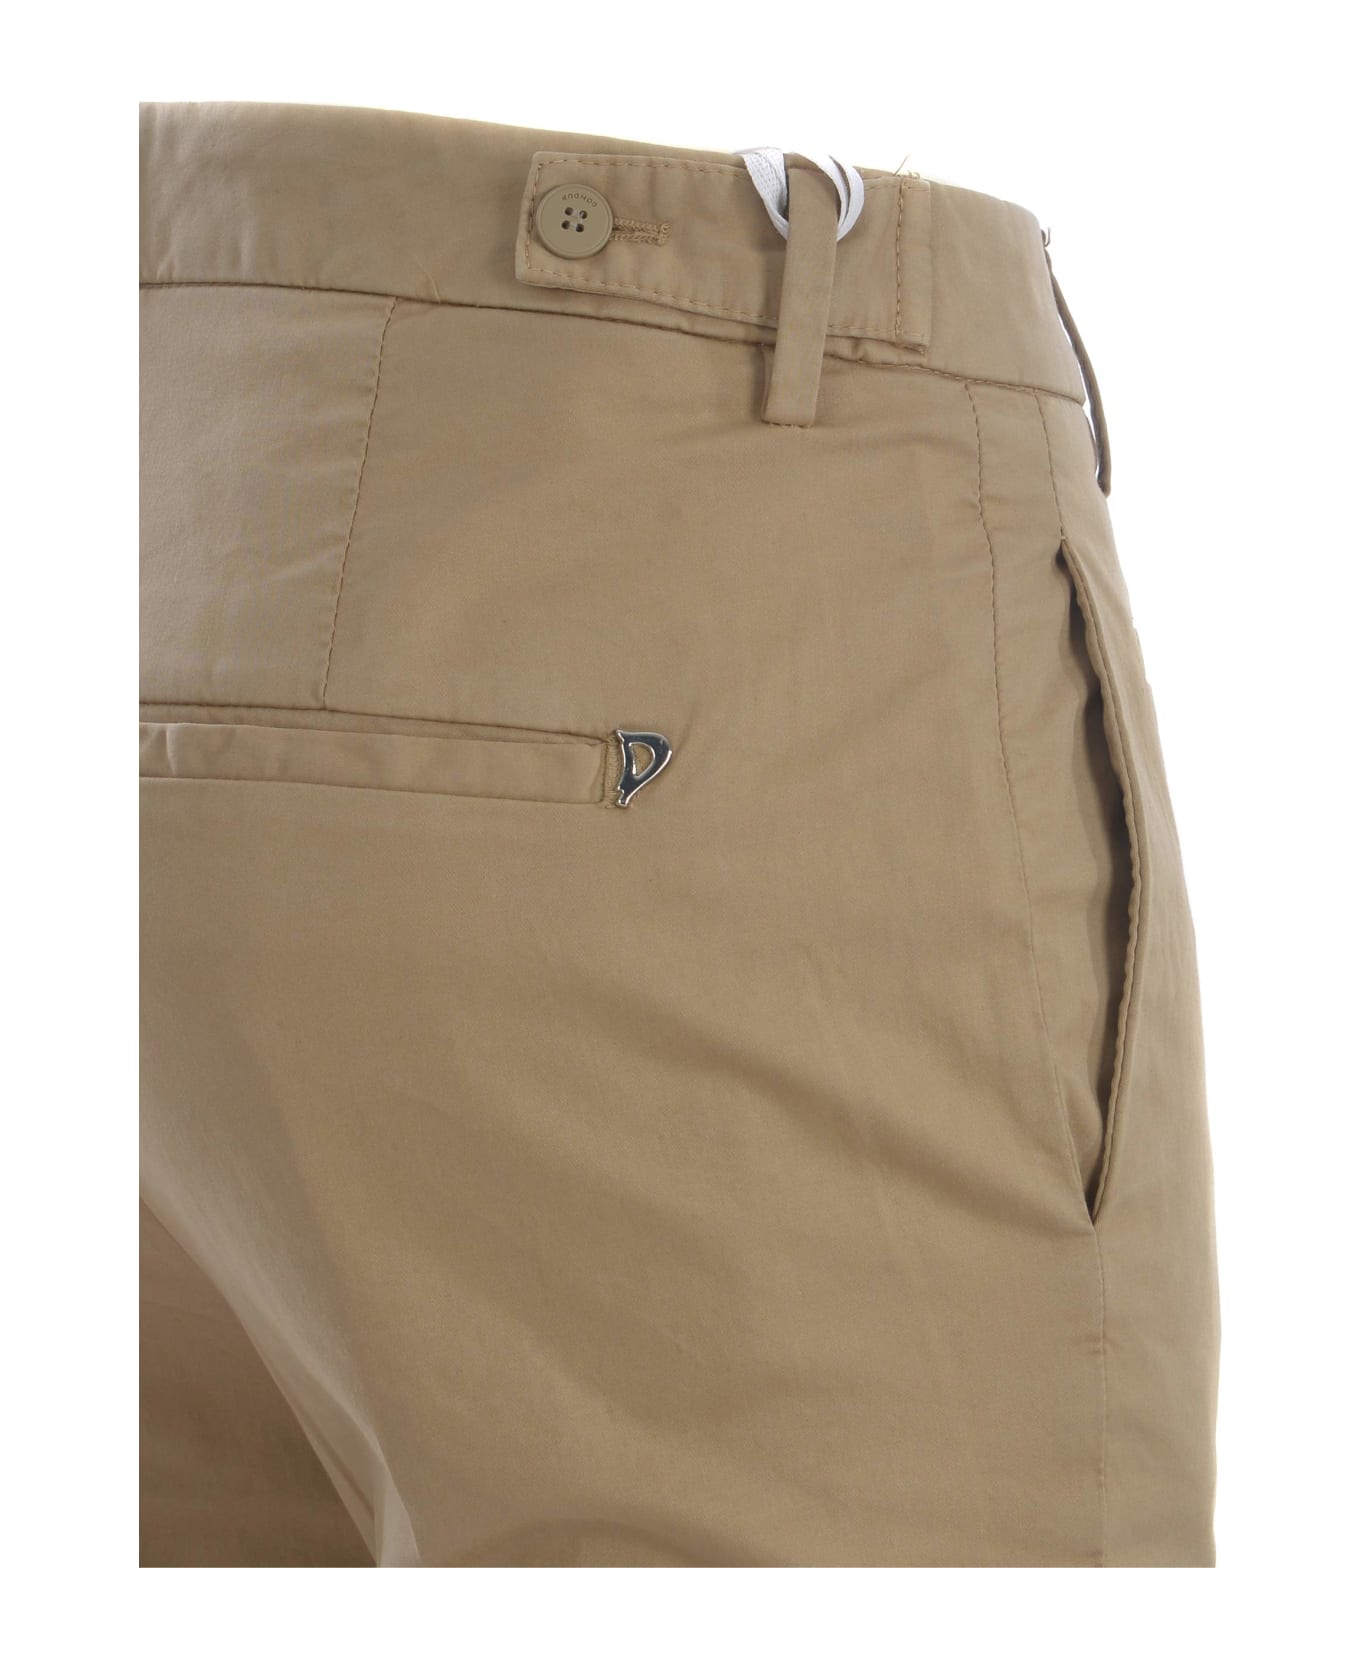 Dondup Trousers Dondup "ariel" Trousers Made Of Cotton - Beige